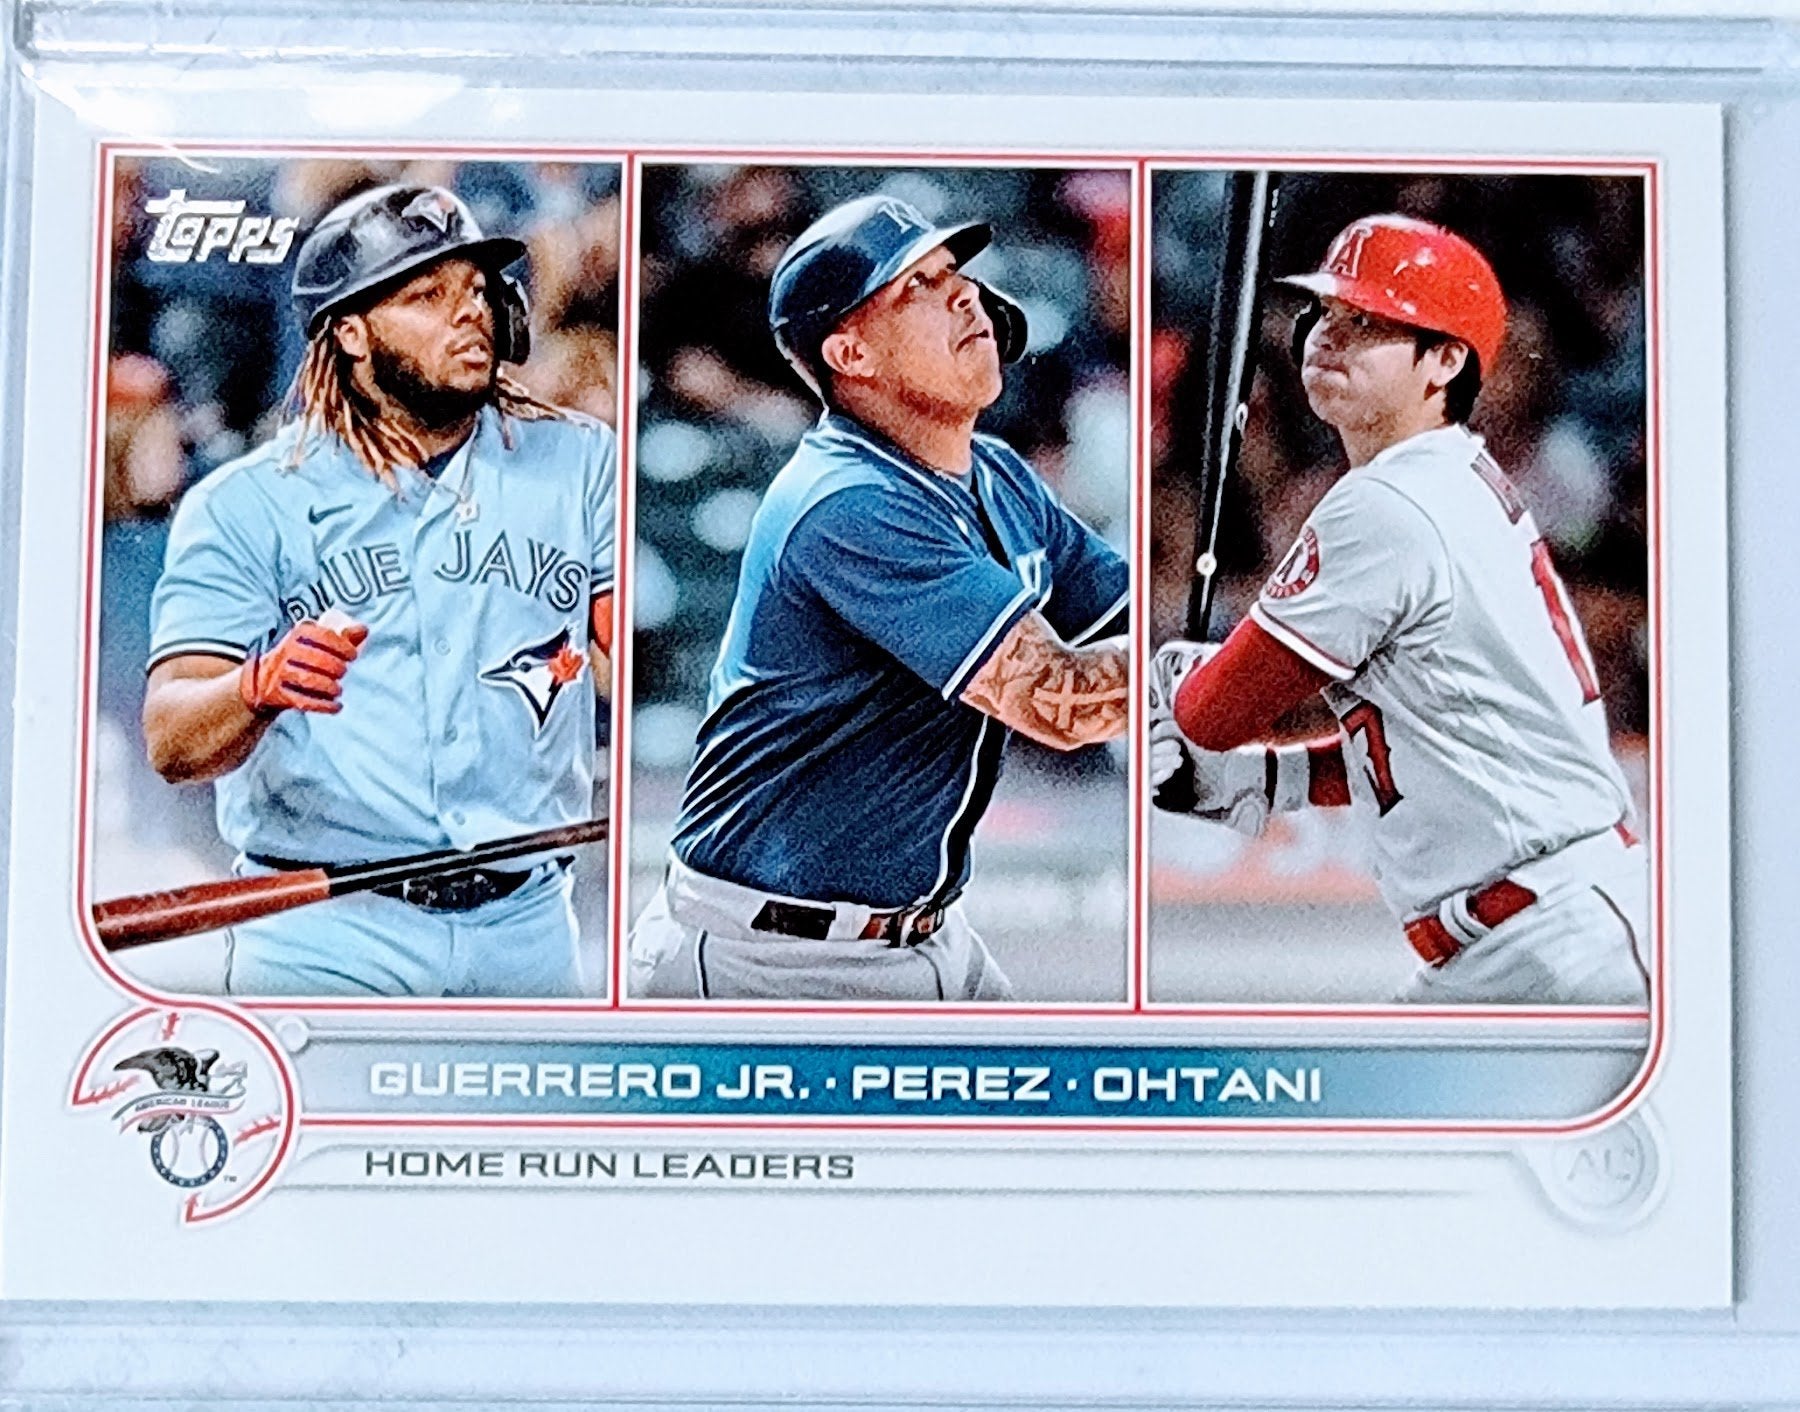 2022 Topps Homerun Leaders Guerrero Jr, Perez & Ohtani Baseball Trading Card GRB1 simple Xclusive Collectibles   